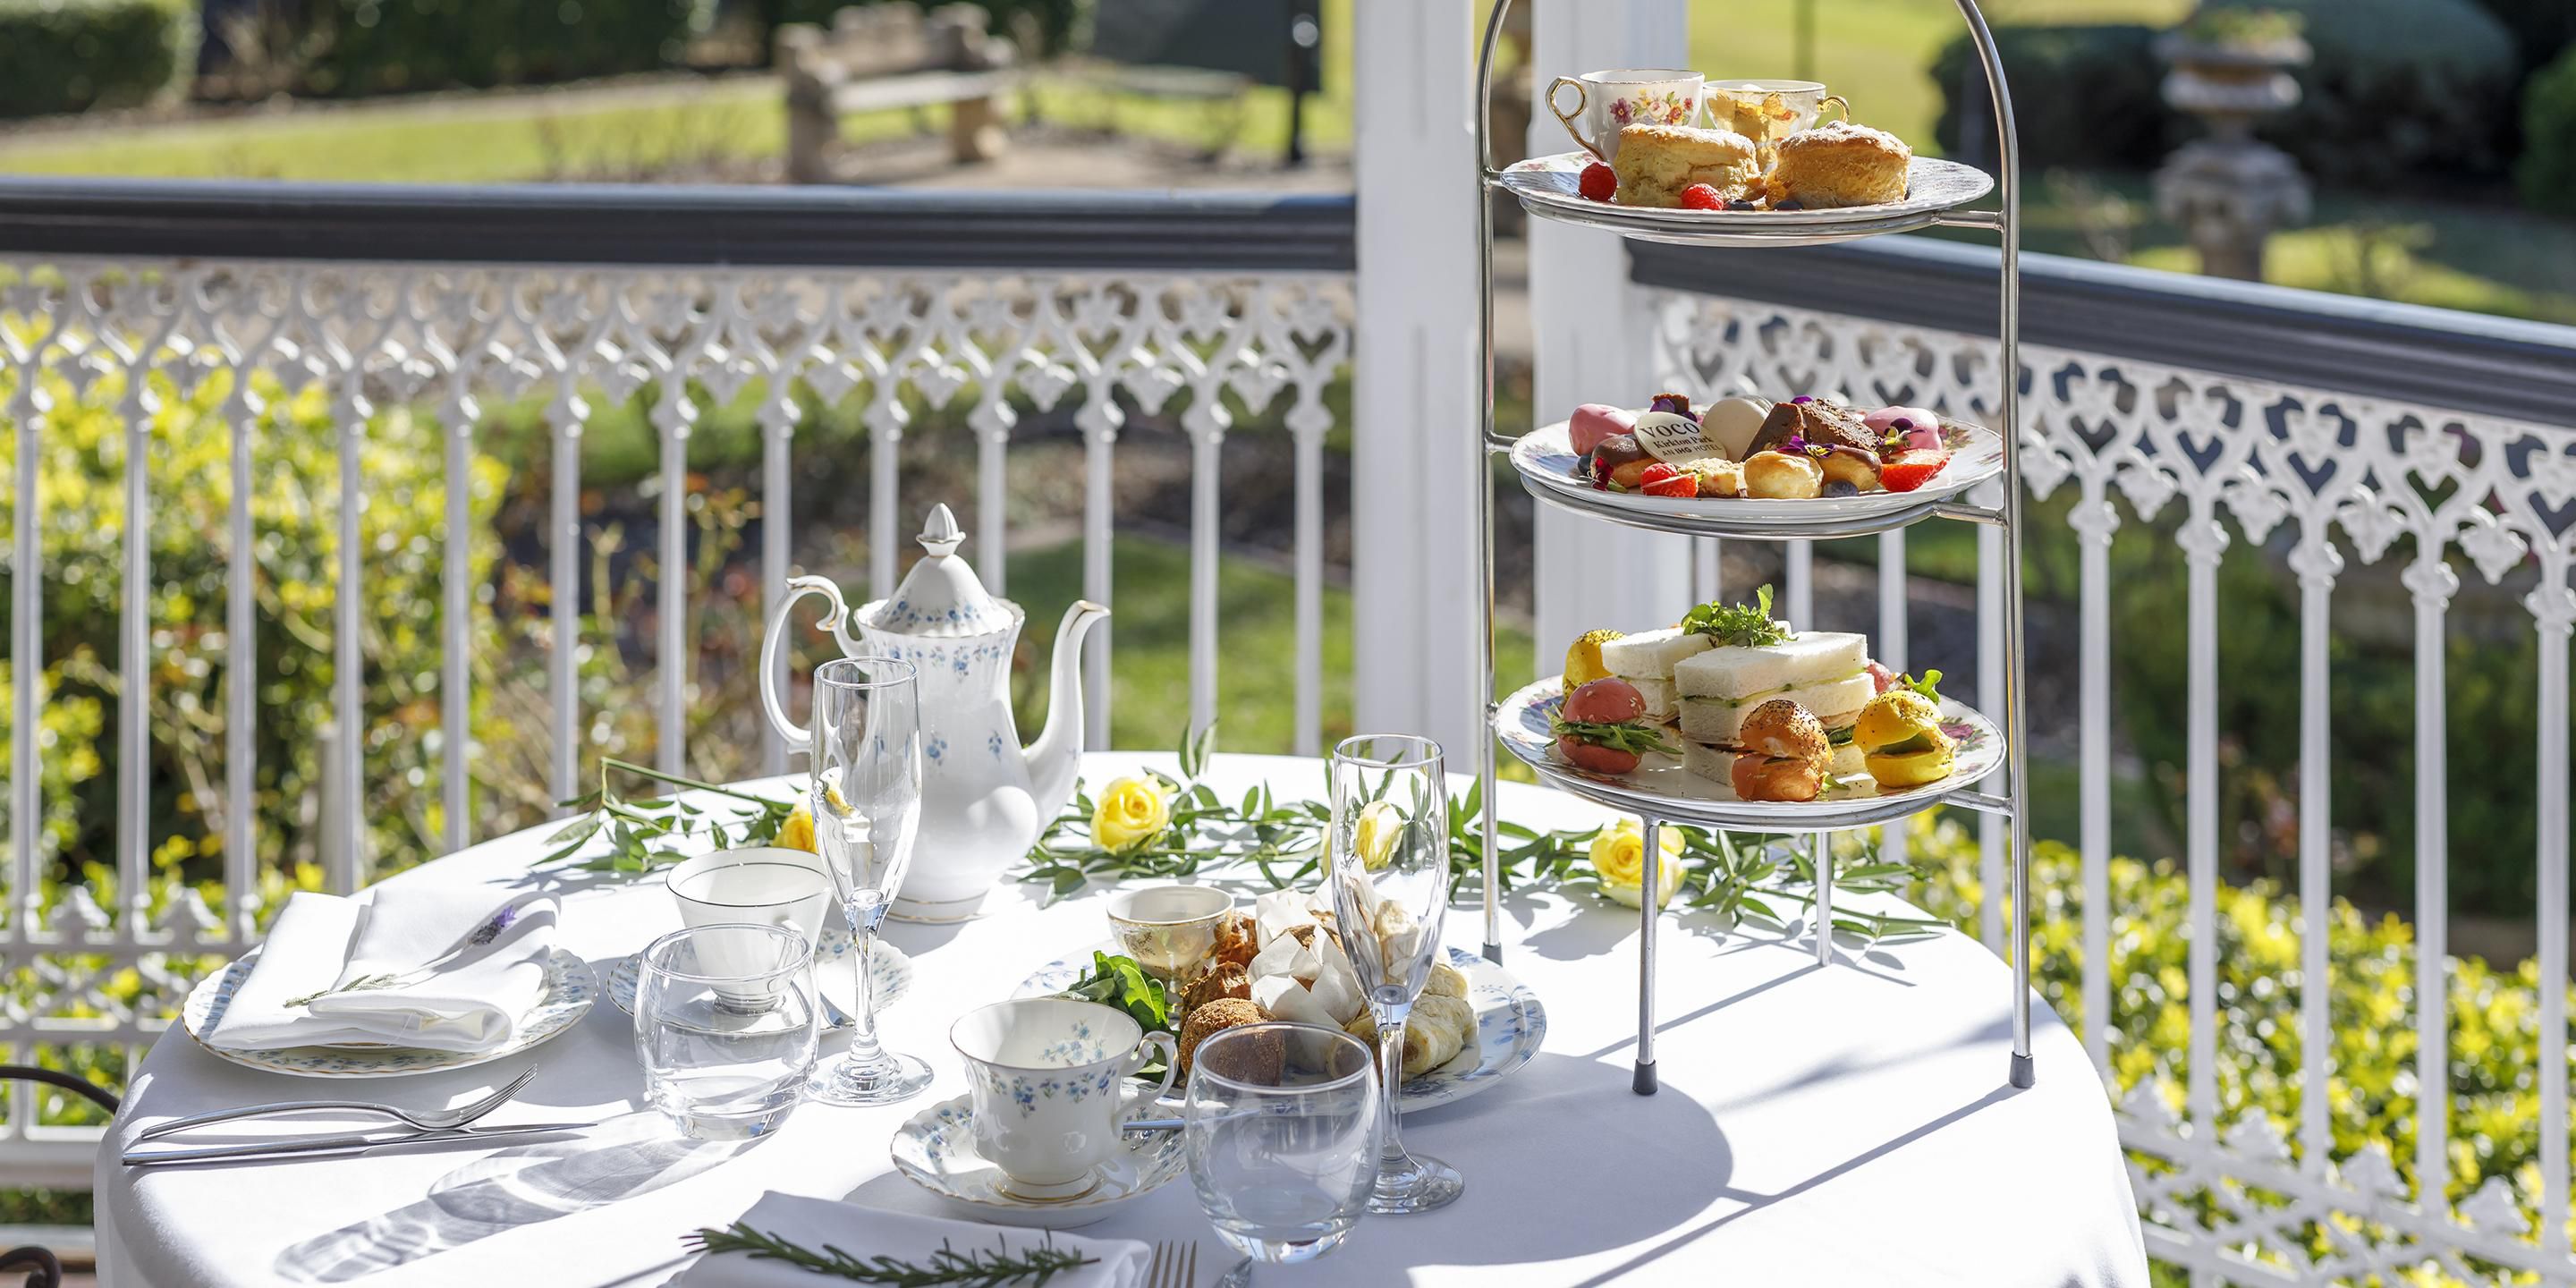 Our exclusive high tea in Hunter Valley is served in our sun-filled Conservatory, boasting views of the rose garden and the Brokenback Ranges cascading in the distance. High Tea at $65 per person or pair with a glass of Peterson Gateway Sparkling — a premium Hunter Valley sparkling wine for an extra $10 per person.